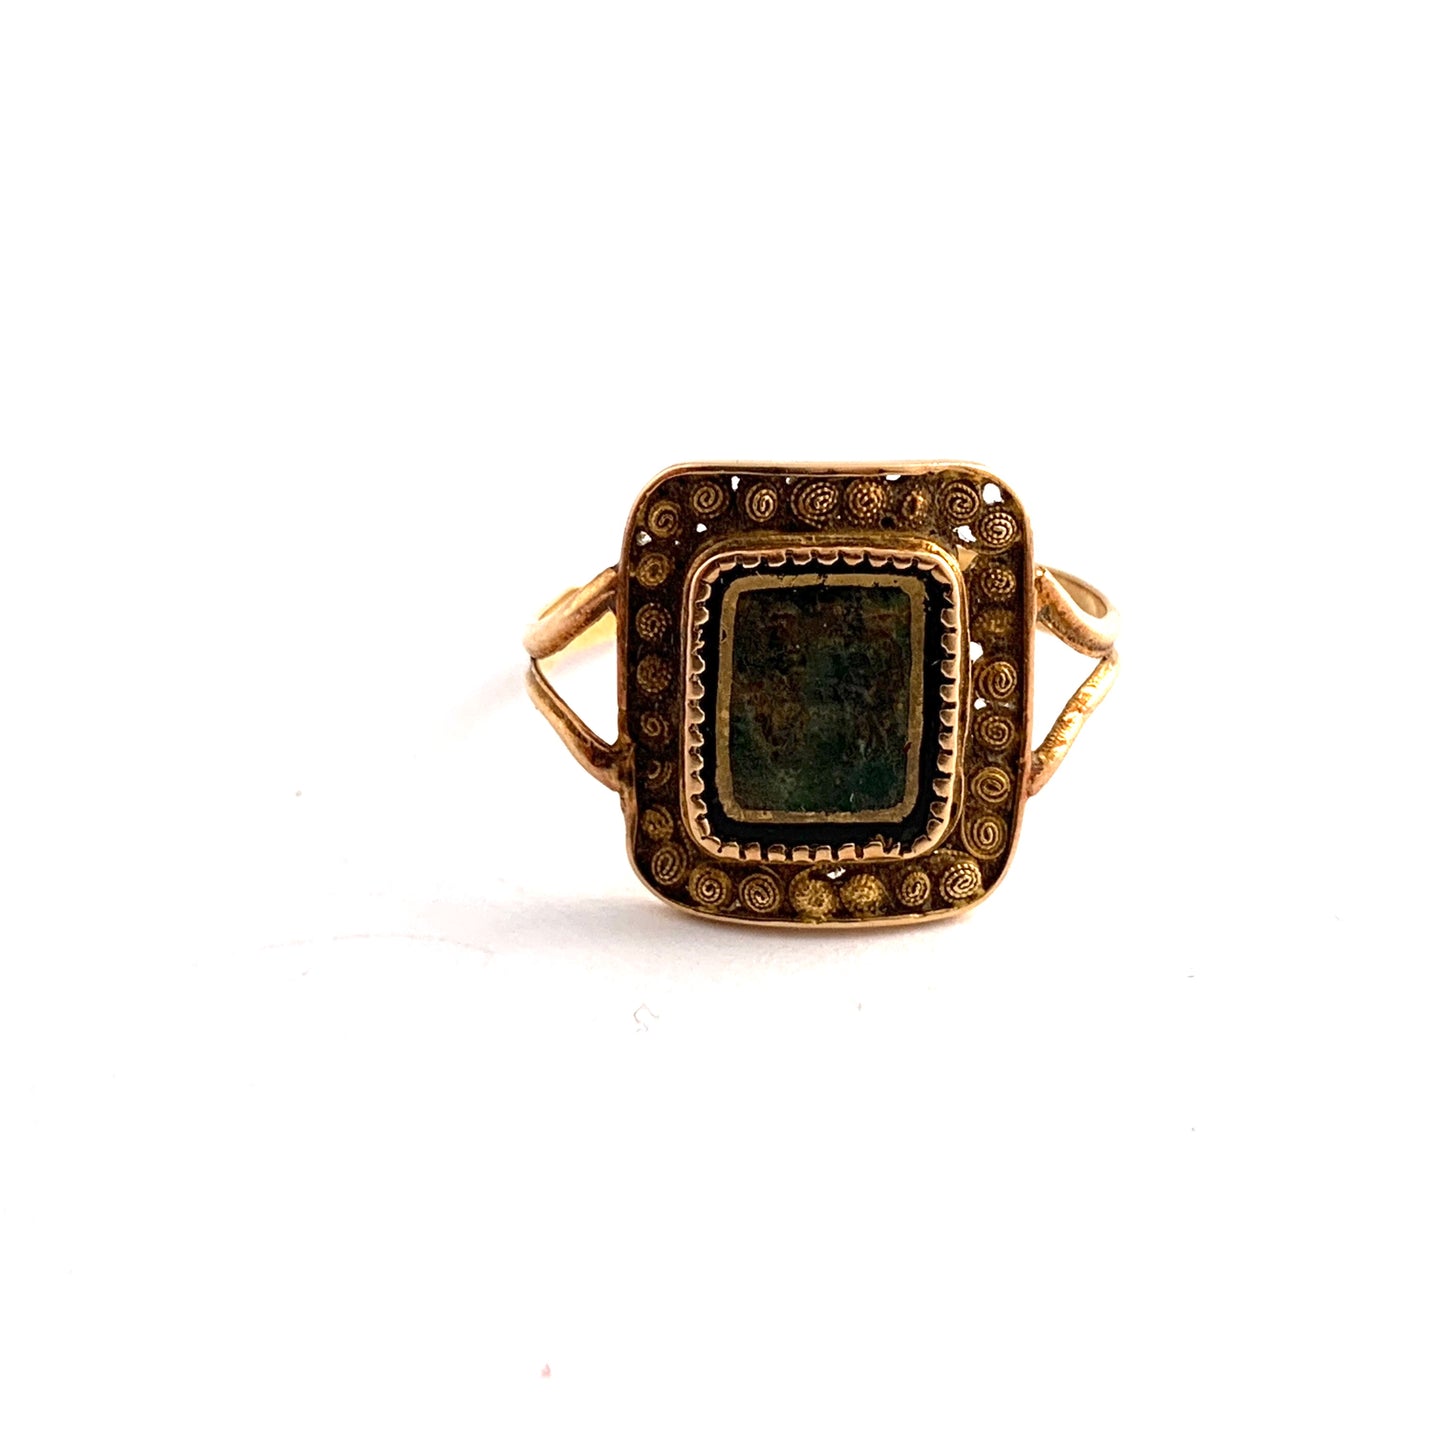 P A Thomason, Sweden 1845. Antique Reversed Painted Glass Ring.